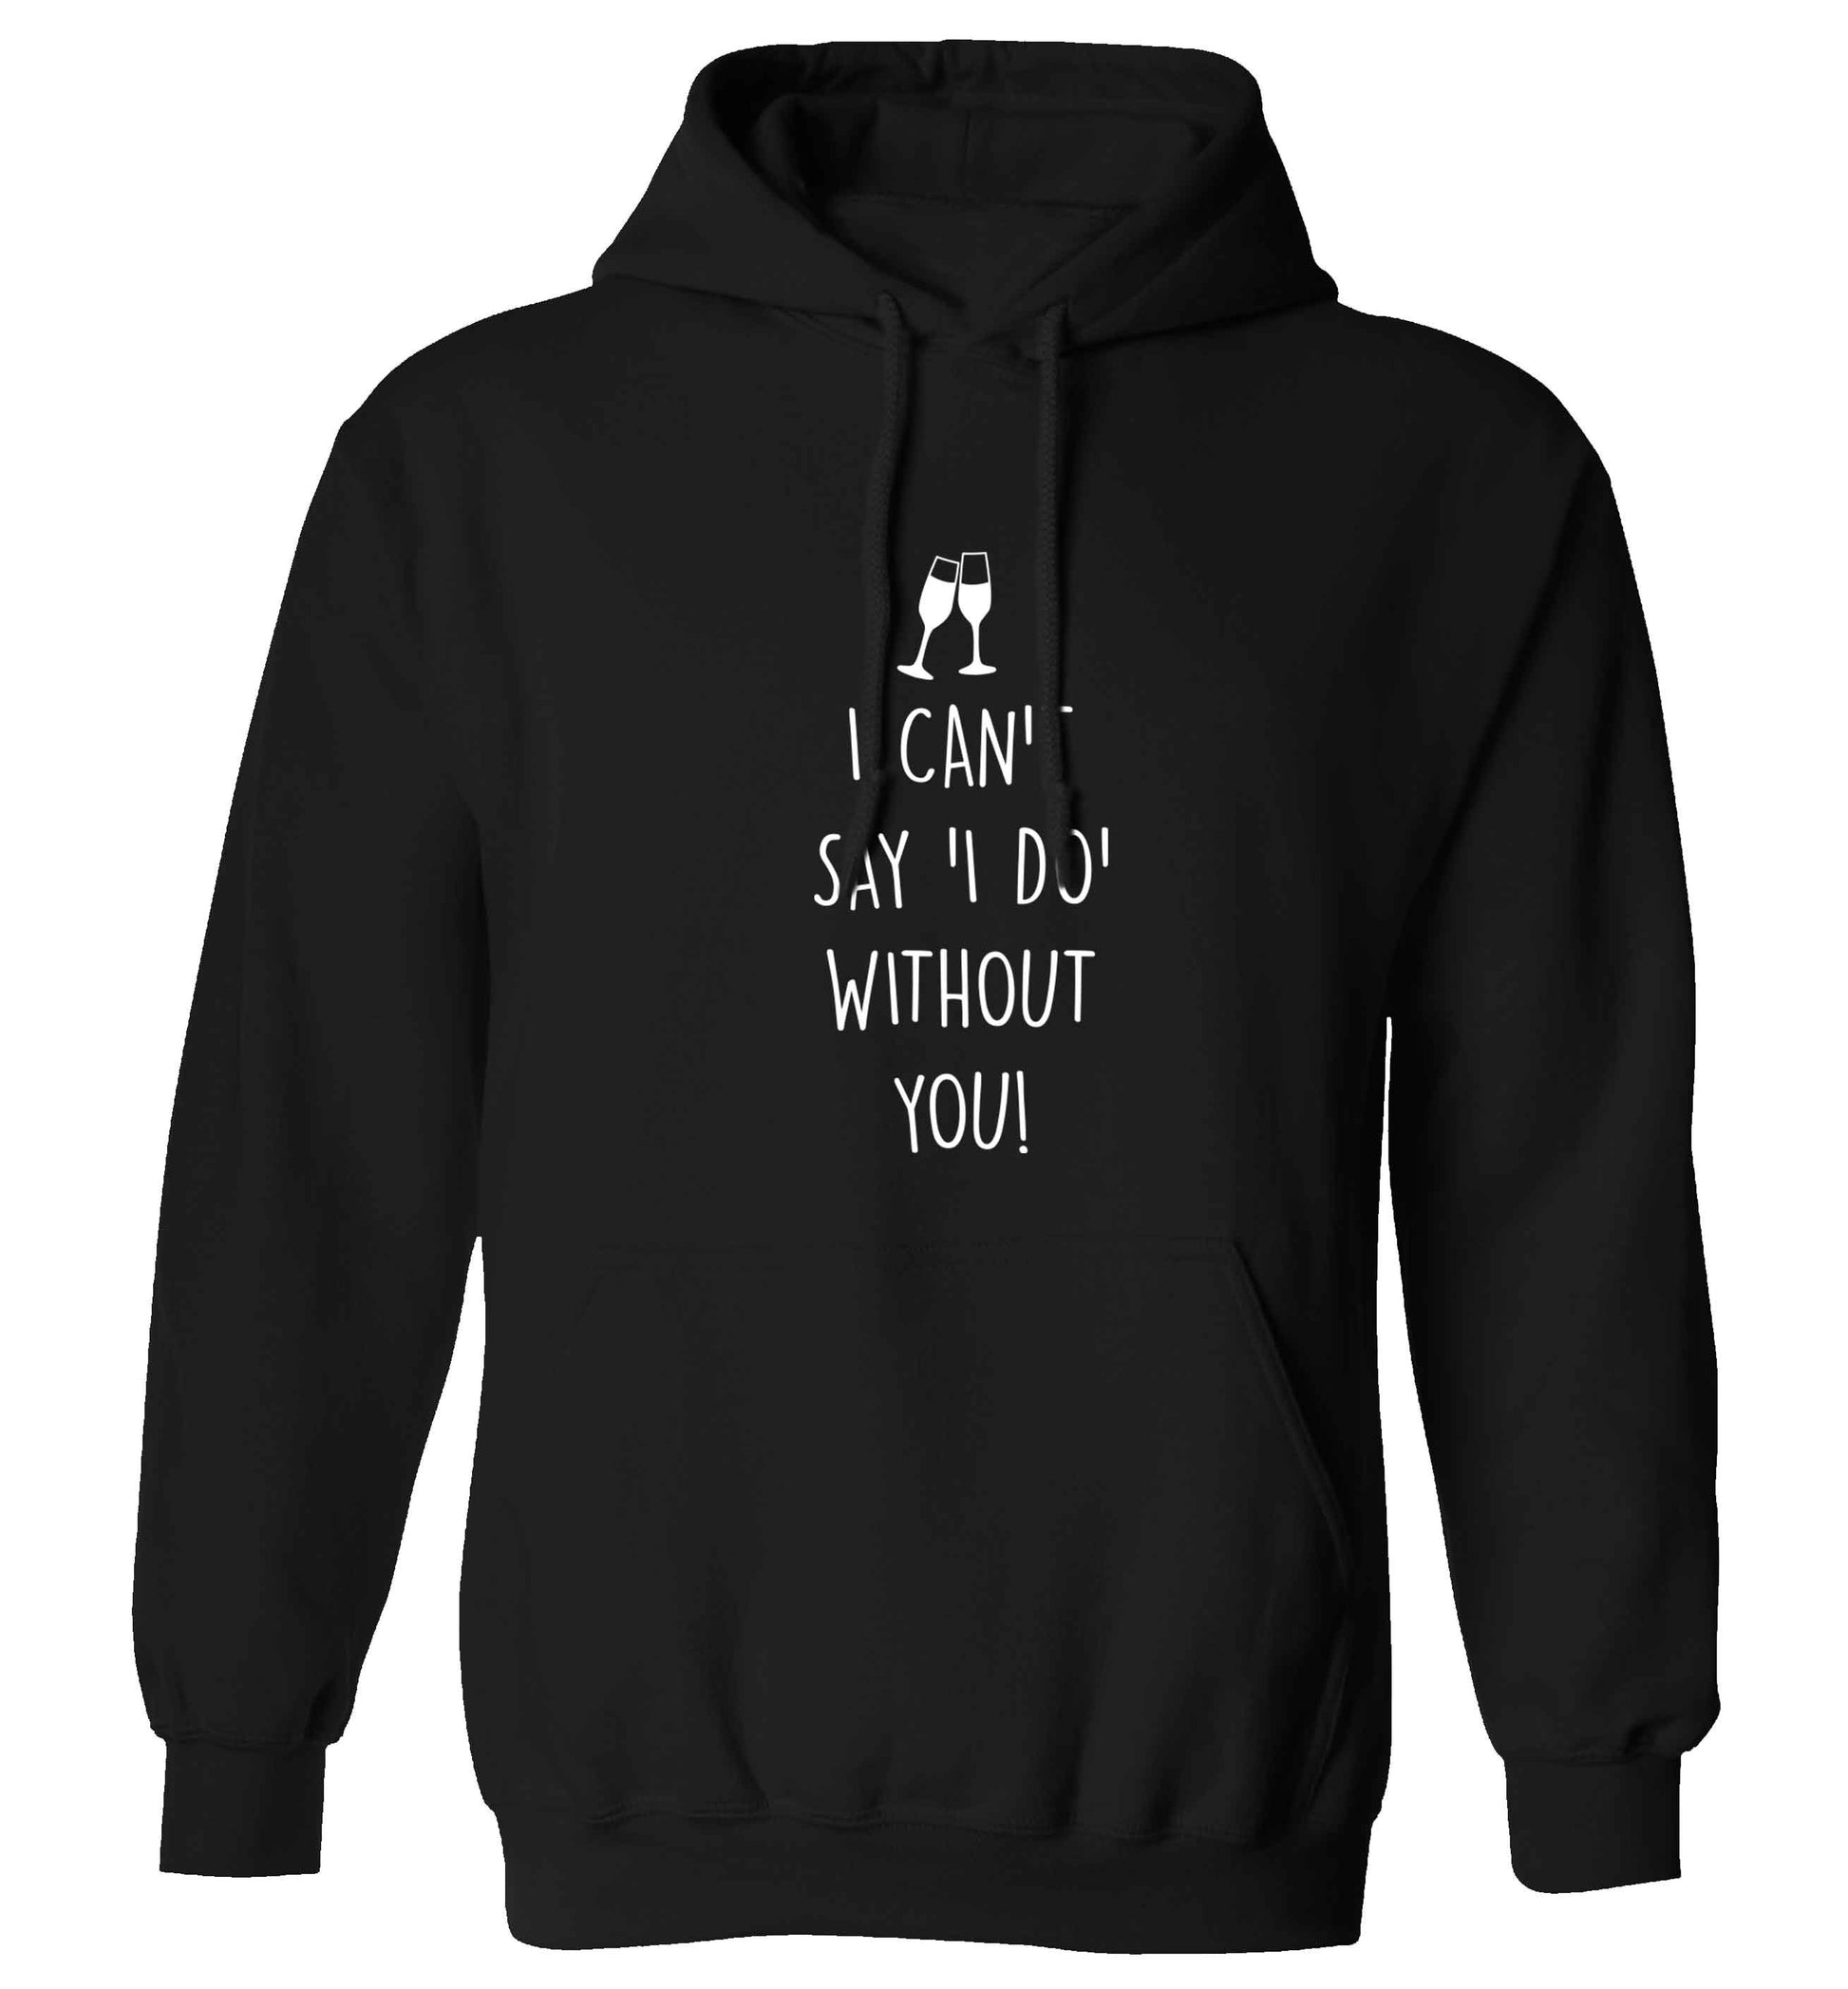 I can't say 'I do' without you! adults unisex black hoodie 2XL